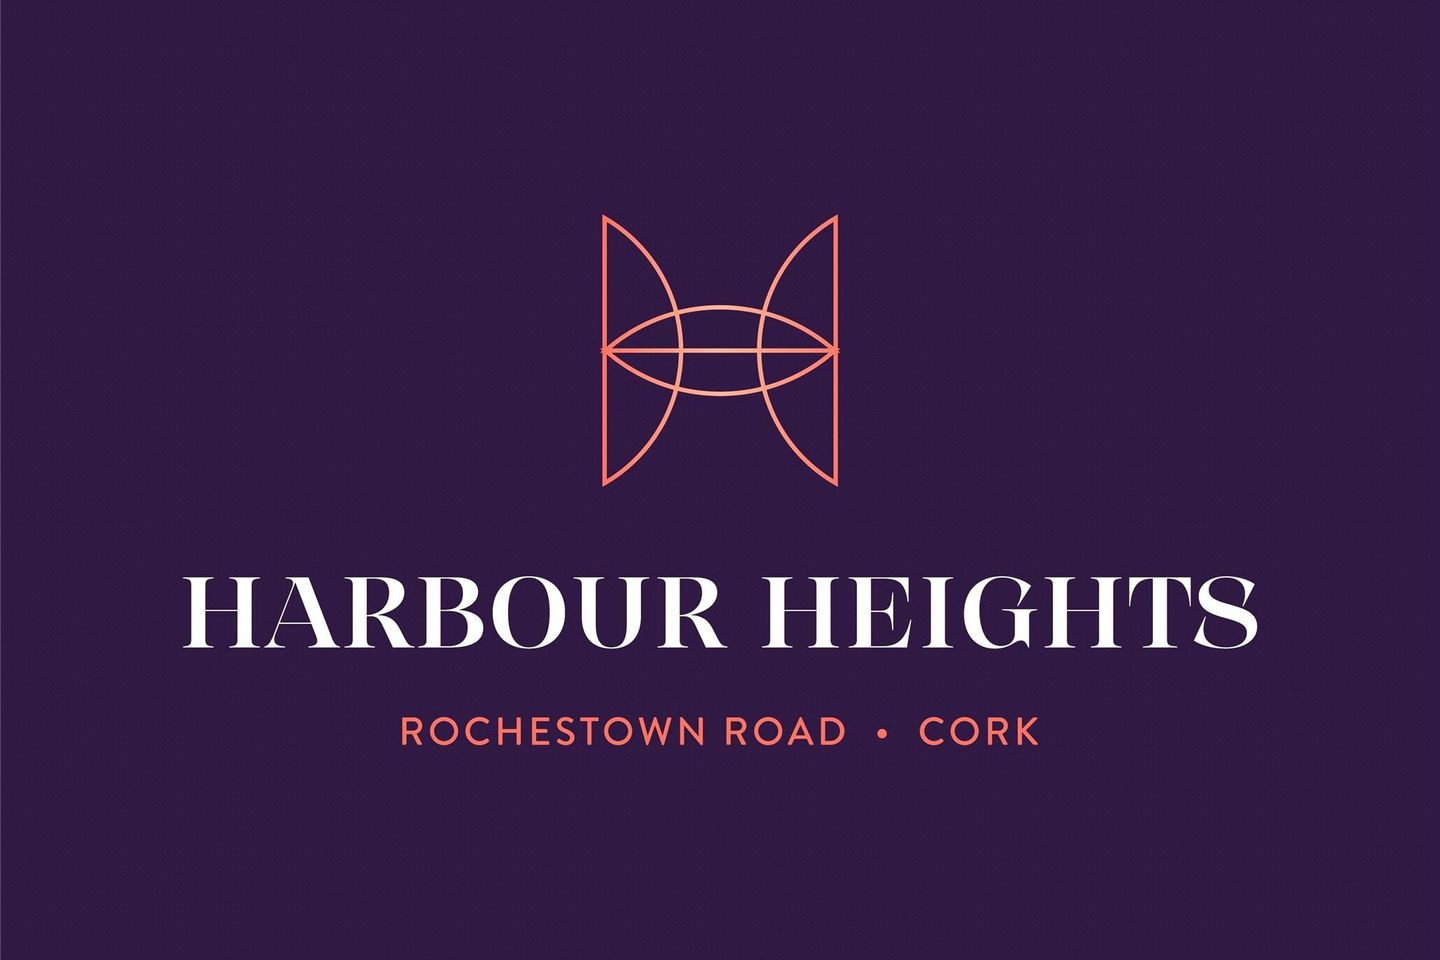 Type F3 - Four Bed Detached, Harbour Heights, Type F3 - Four Bed Detached, Harbour Heights, Rochestown Road, Cork, Passage West, Co. Cork